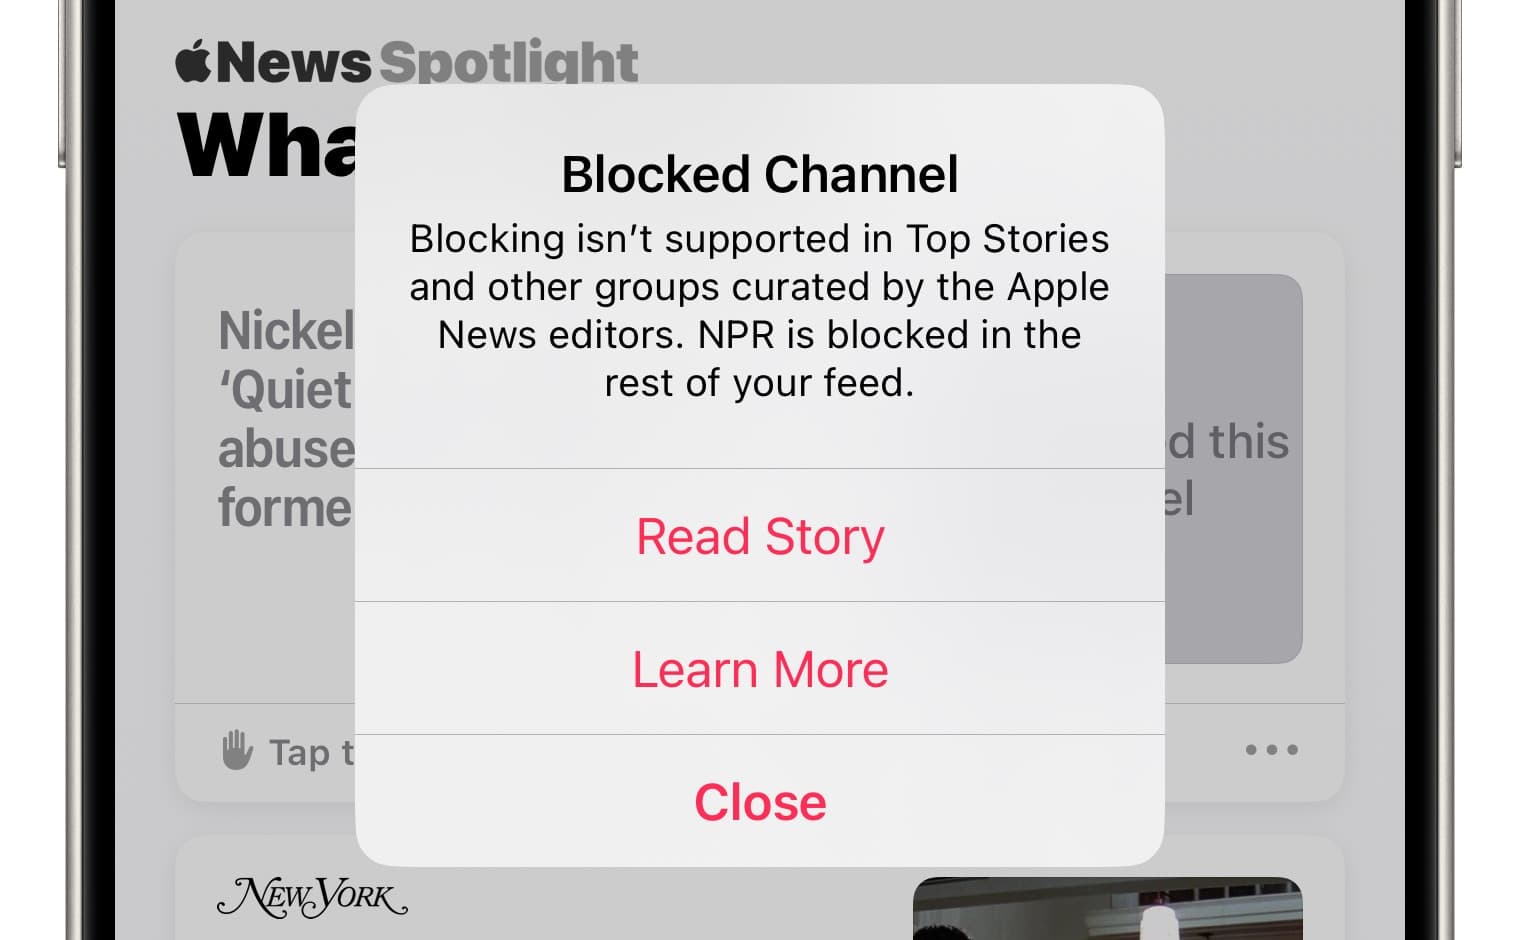 Blocking not supported in Top Stories and groups curated by Apple News editors